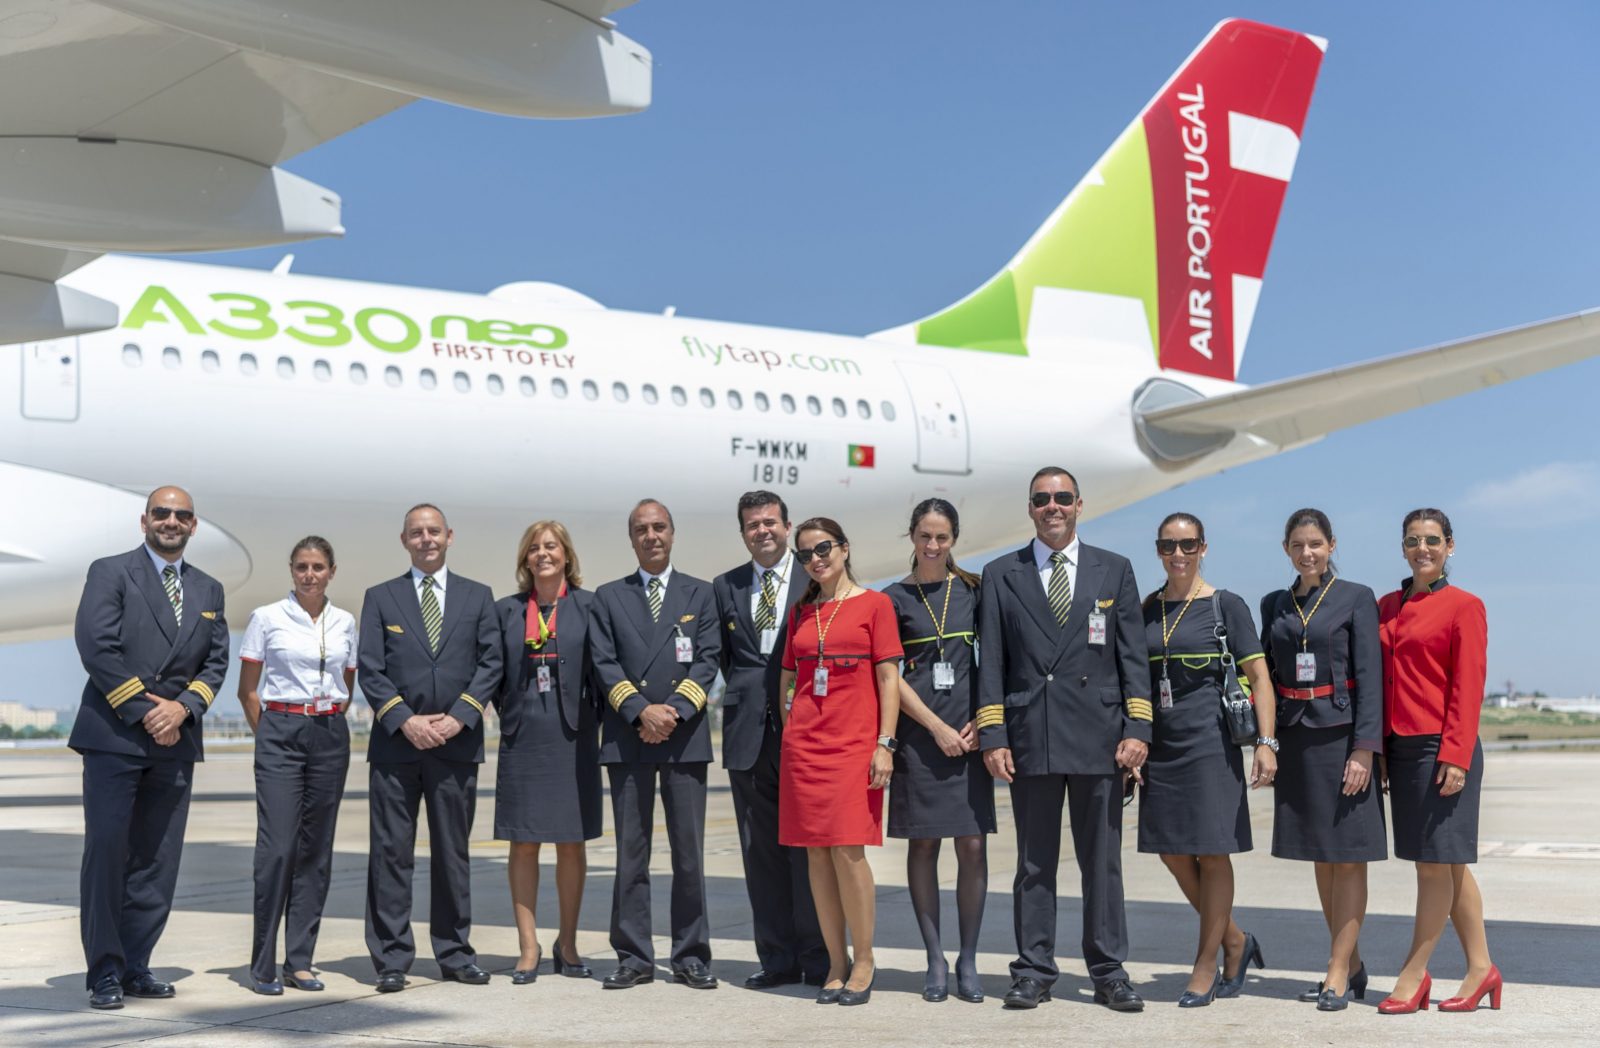 TAP Air Portugal Admits "Odour" Events on New Airbus A330Neo Aircraft That Have Made Cabin Crew and Pilots Ill